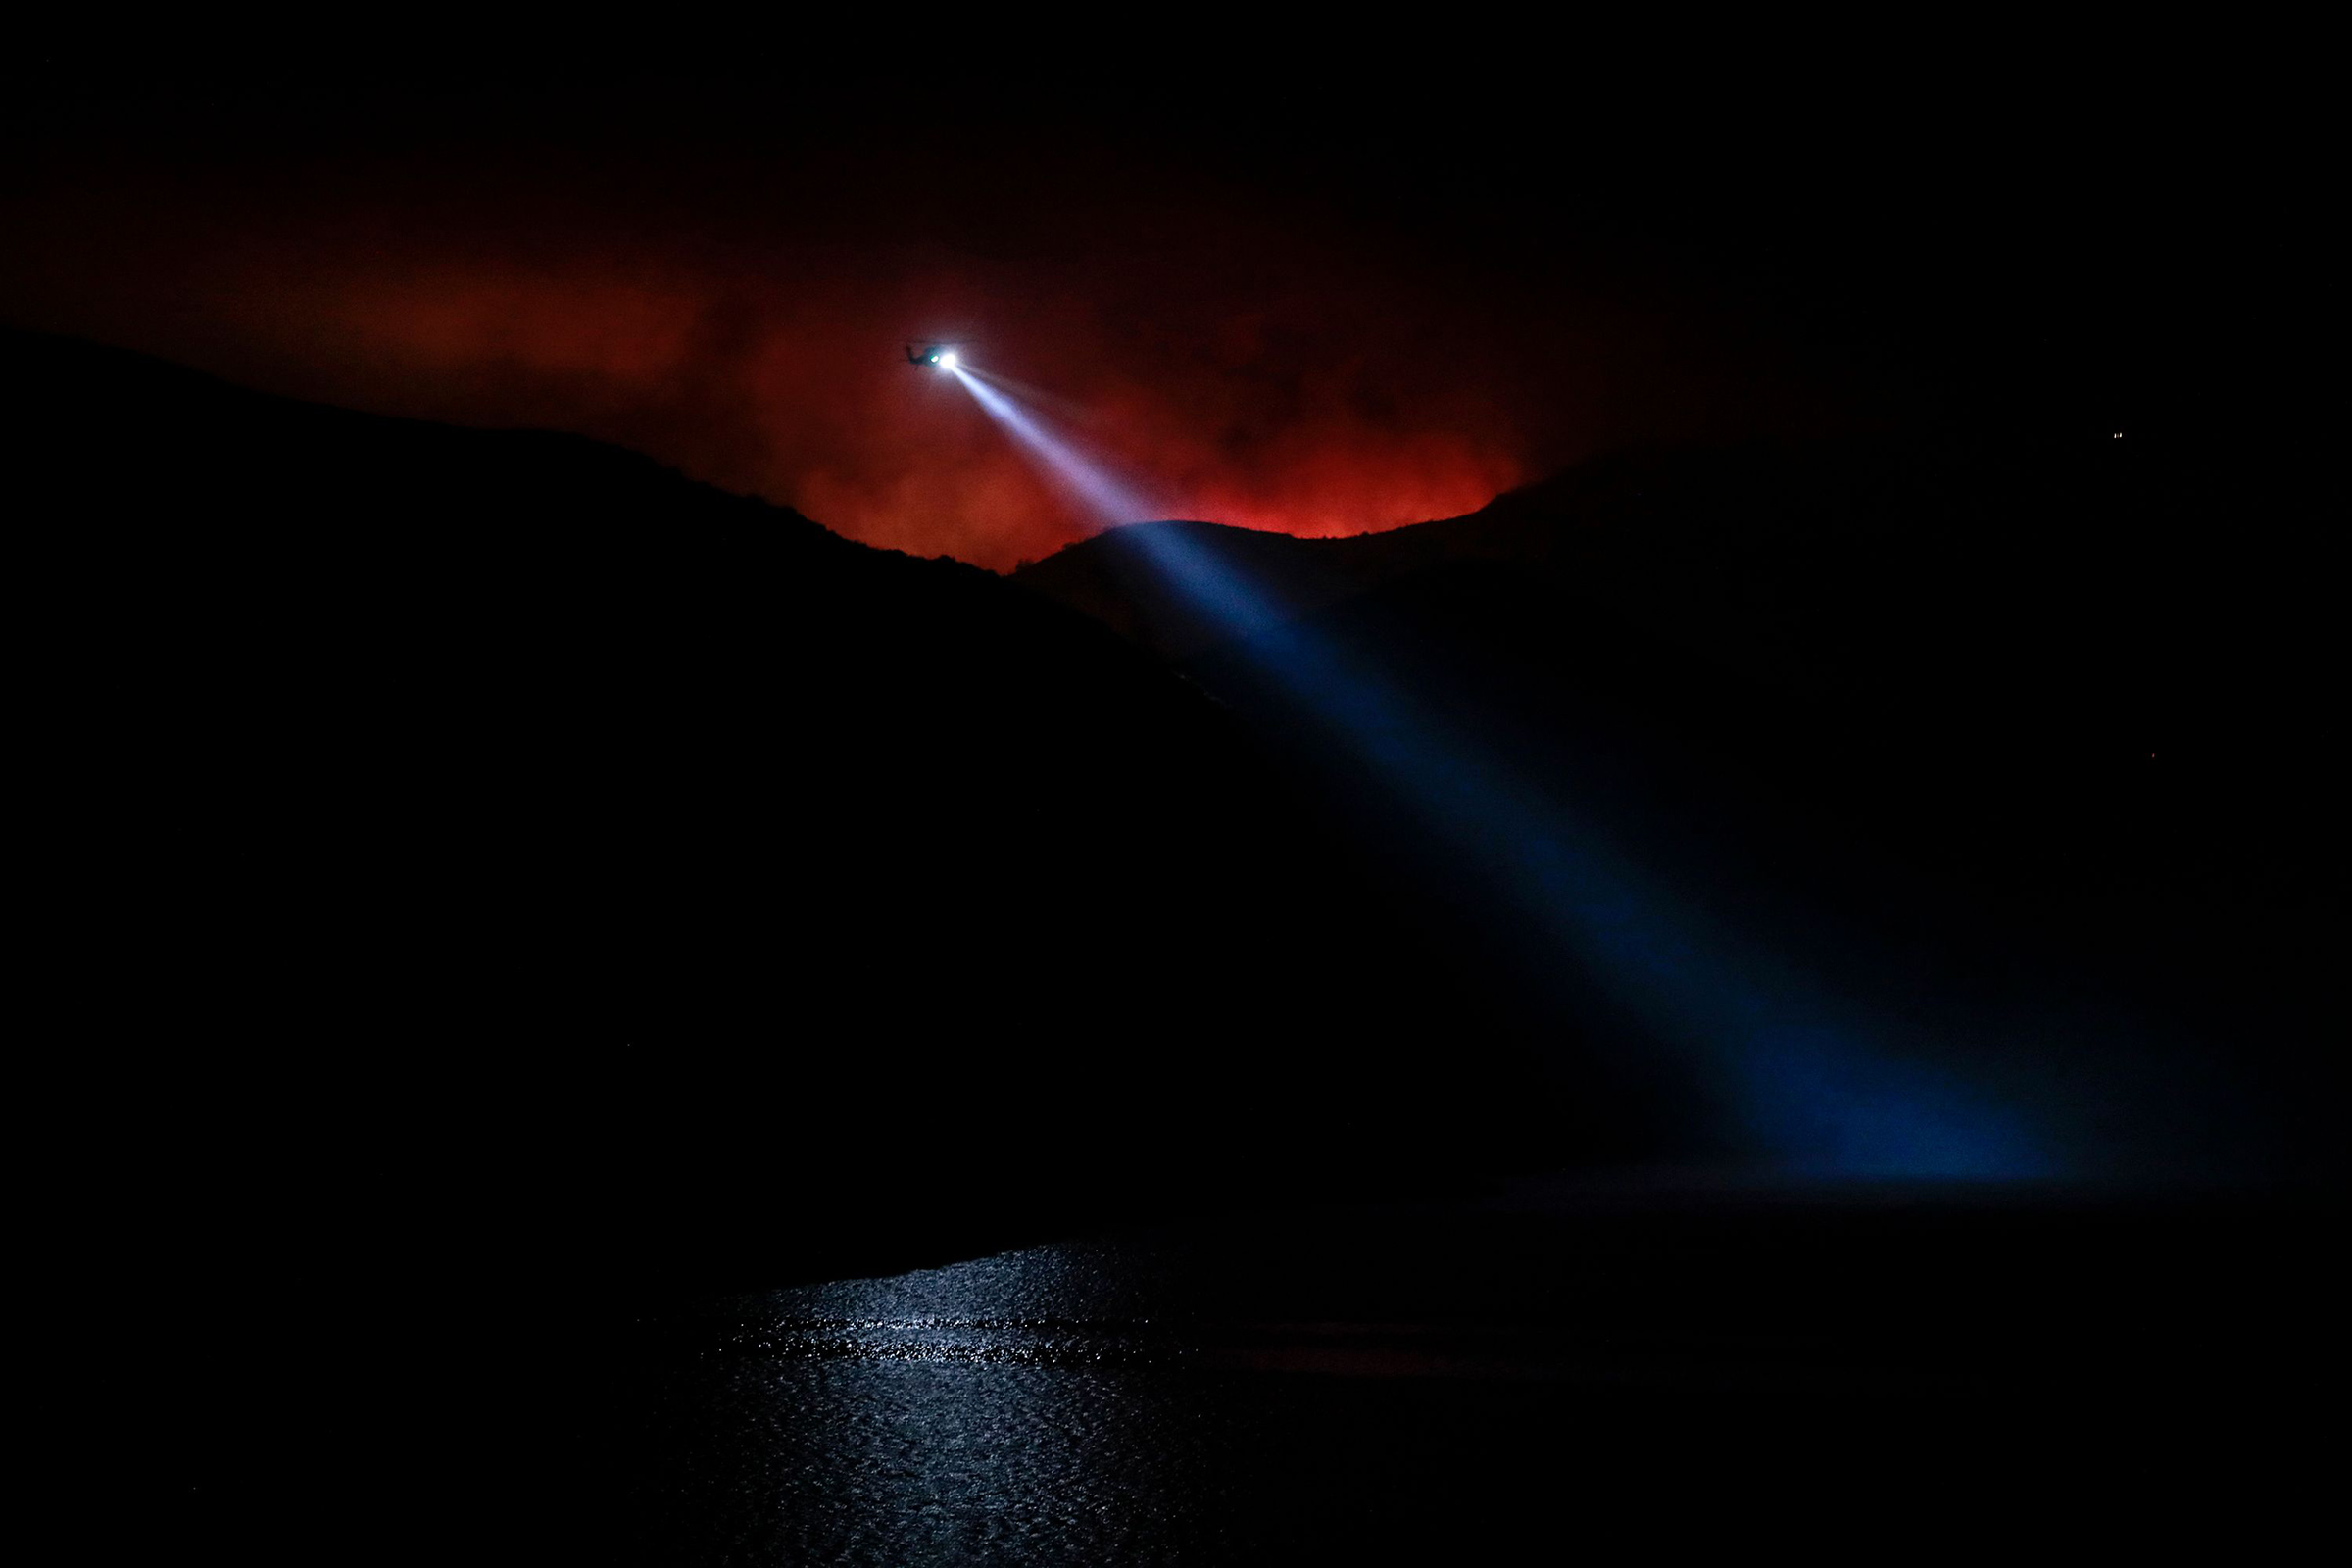 The night sky glows red from the Holser Fire in Piru, Calif., on Aug. 17, 2020, as a water-dropping helicopter works to slow the spread of flames that consumed more than 1,000 acres by the end of its first day just east of Lake Piru.